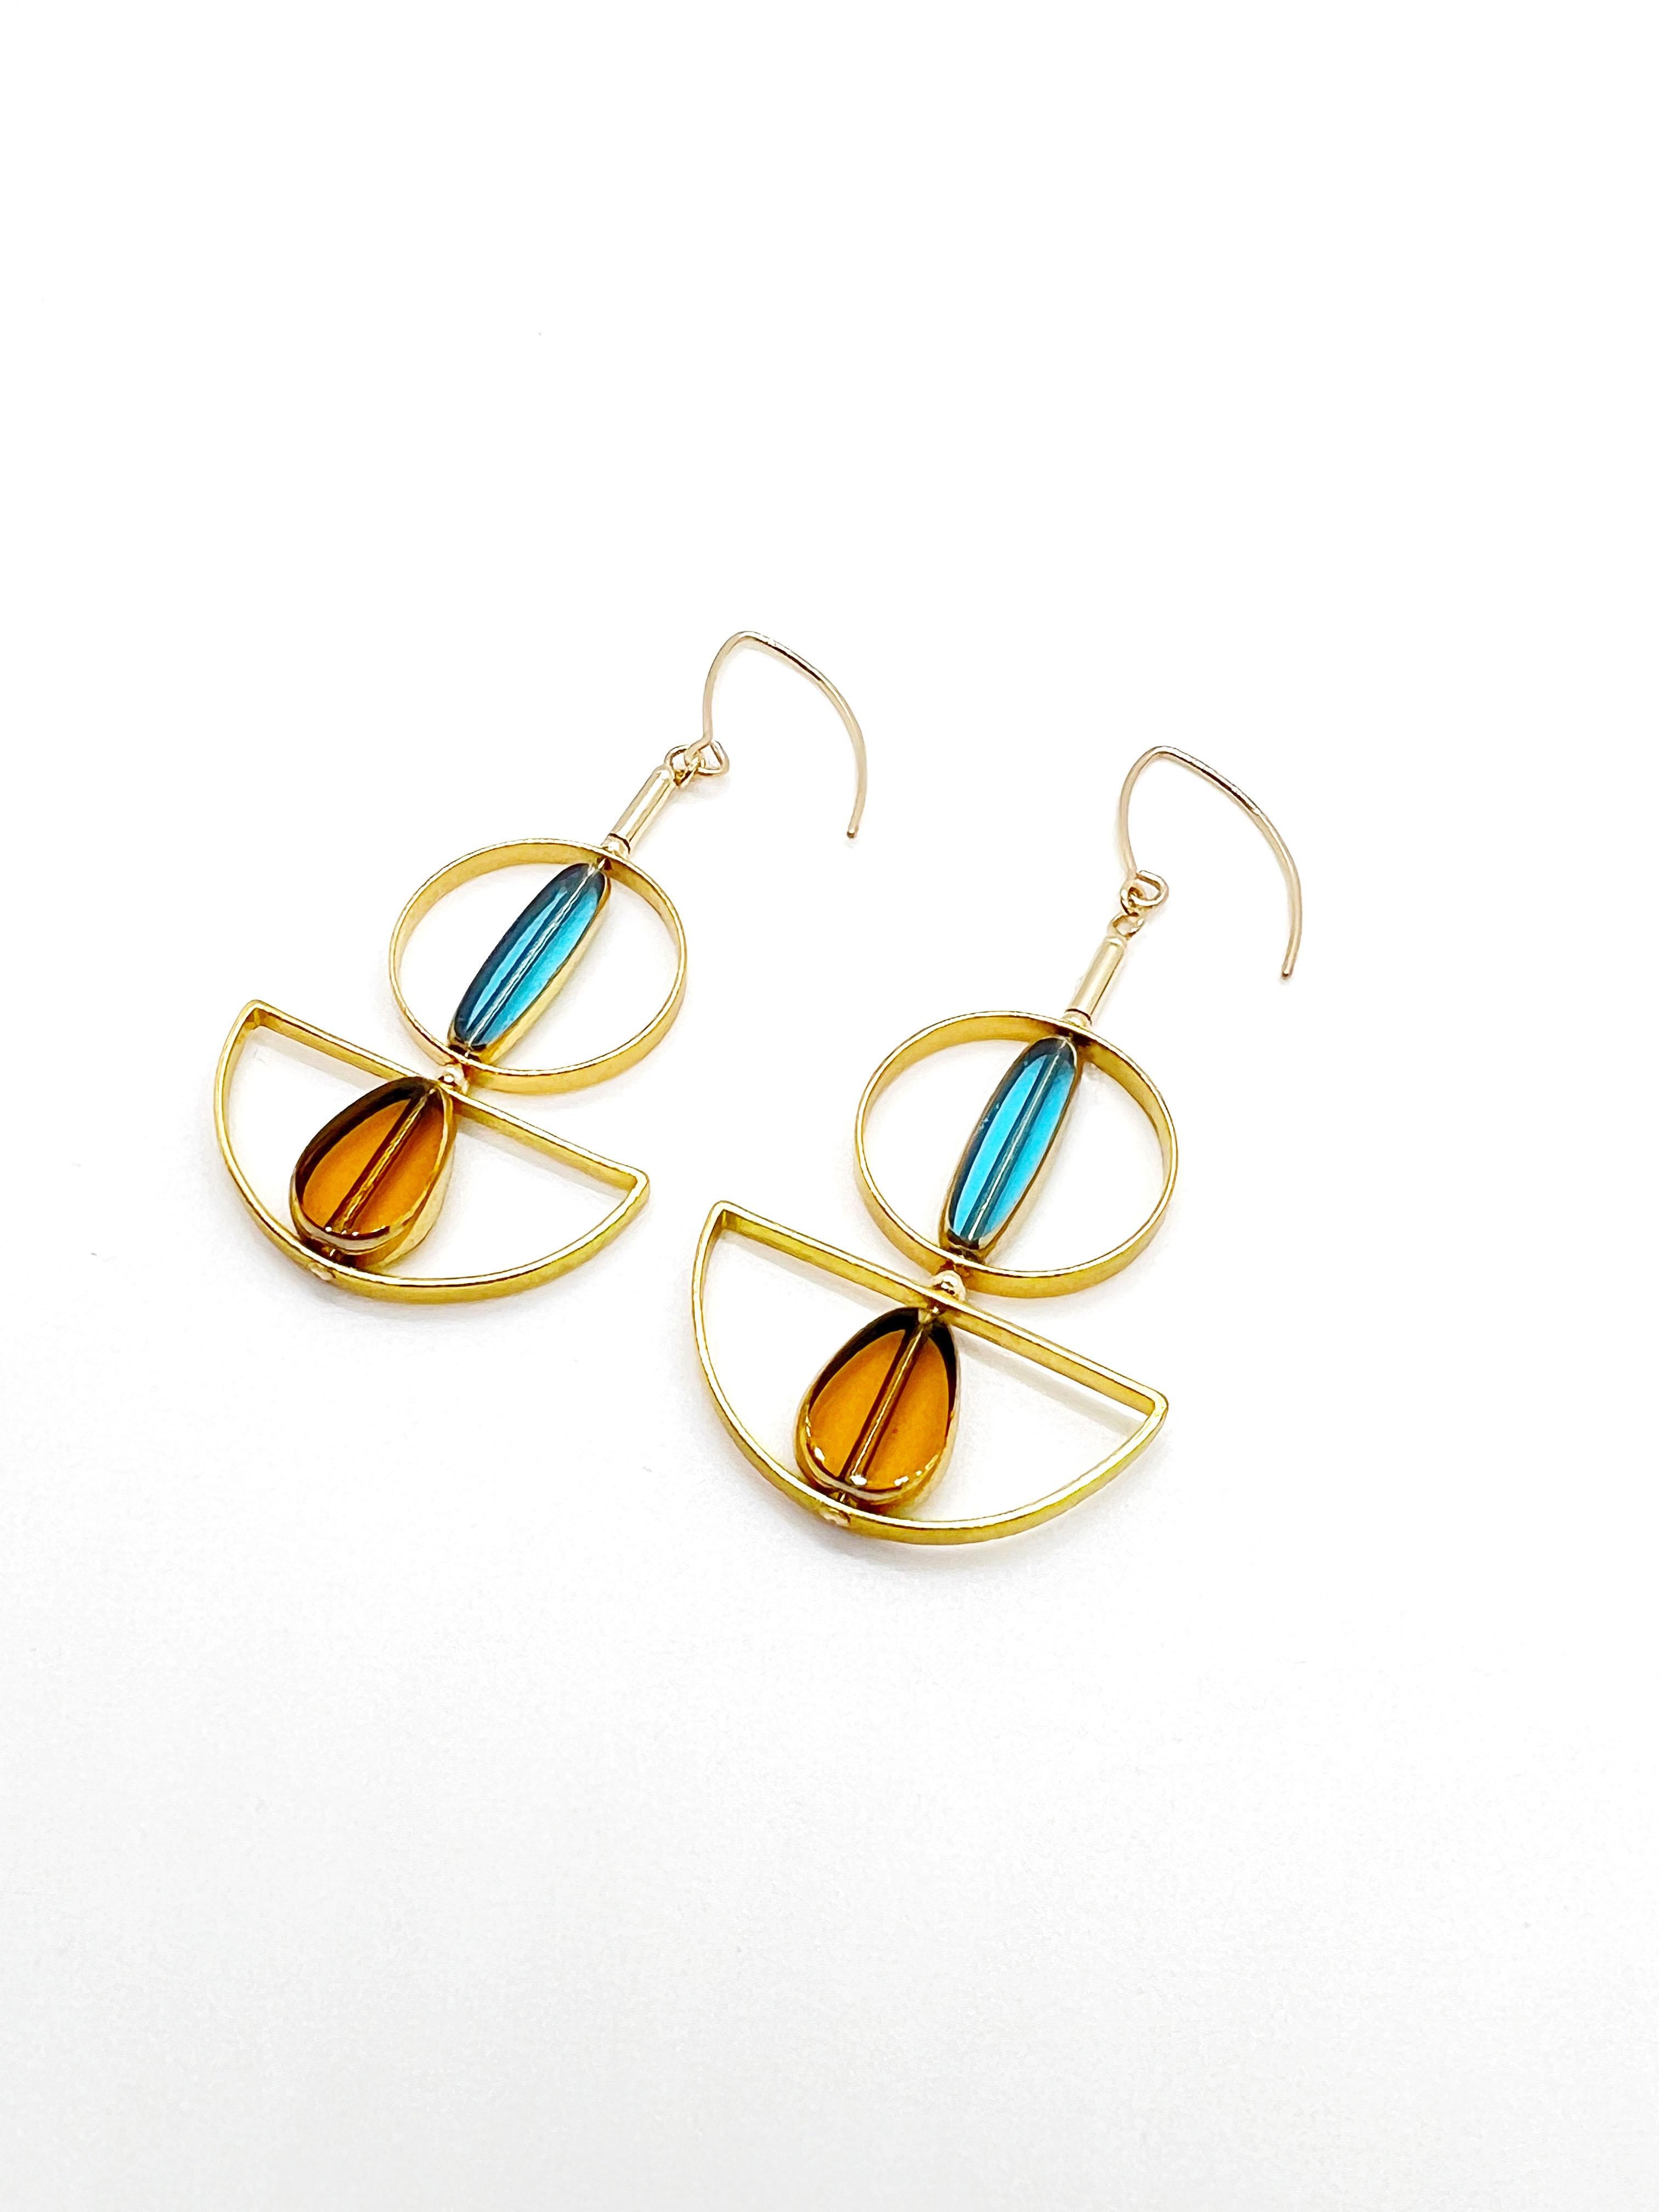 The earrings are light weight and are made to rotate and reposition with movement.

The earrings consist of a blue and yellow shaped beads. They are new old stock vintage German glass beads that are framed with 24K gold. The beads were hand pressed